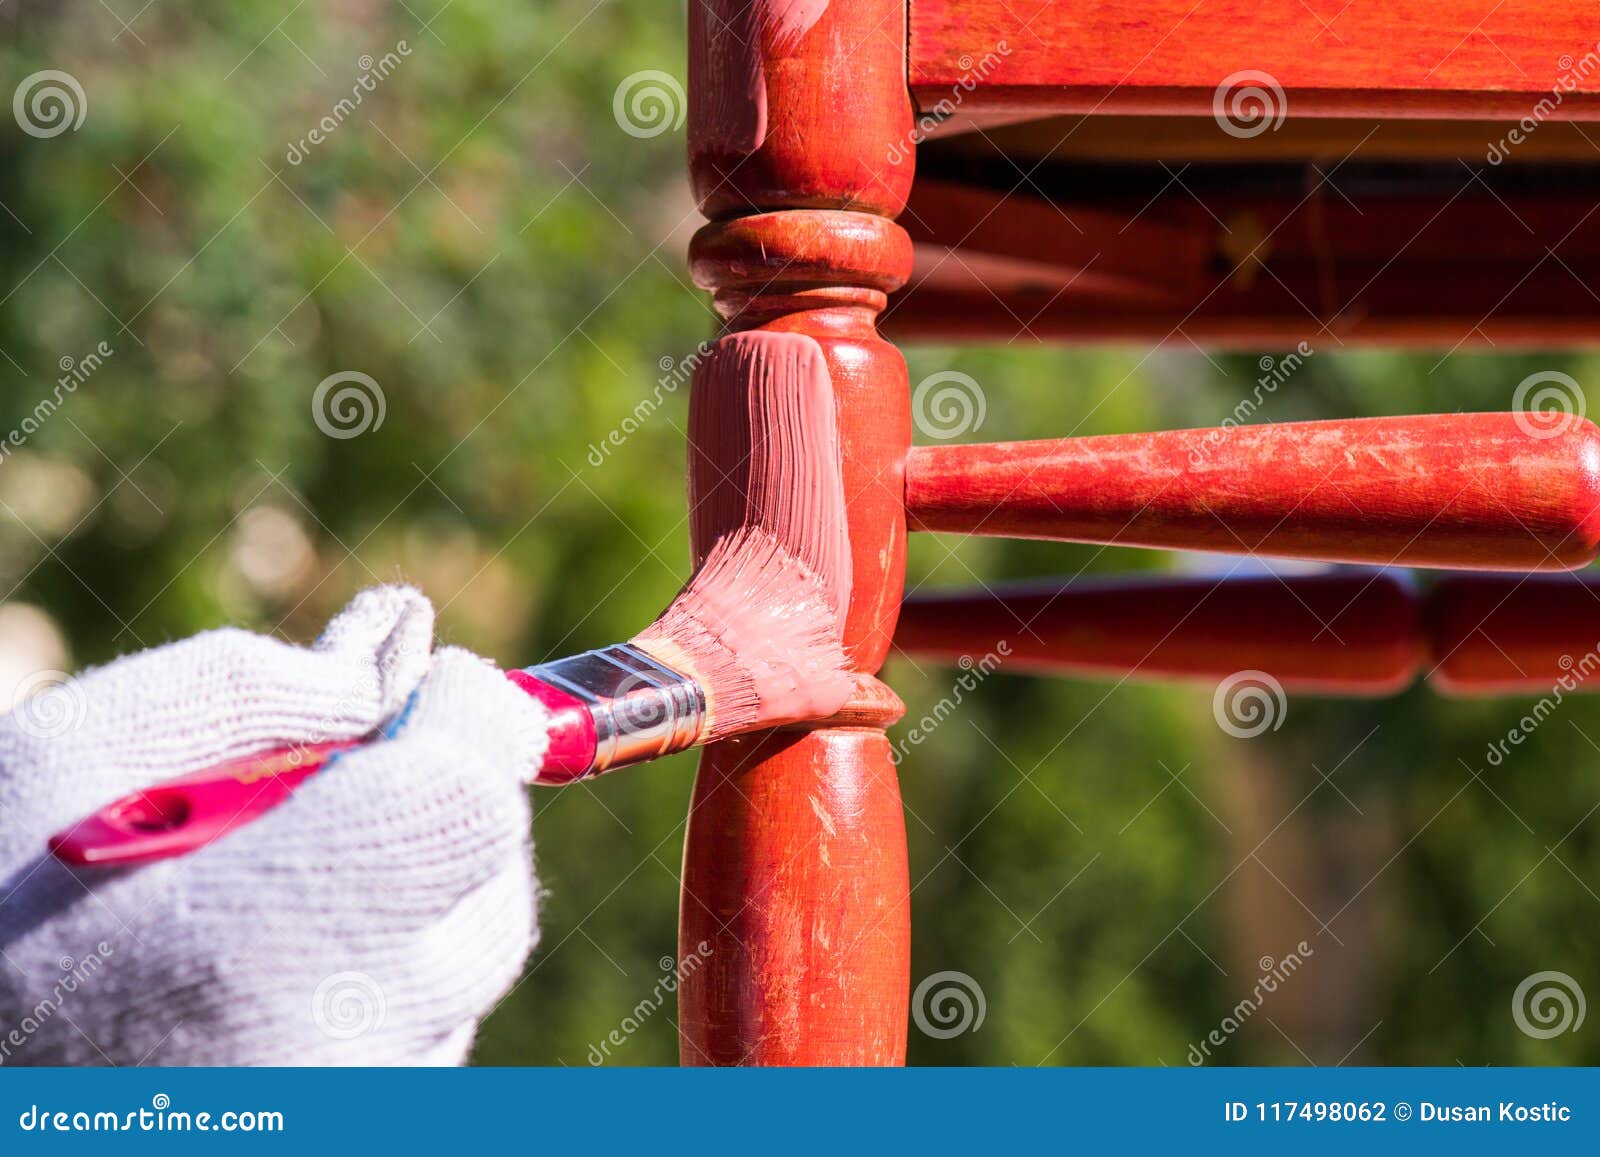 Painting Wooden Chair With A Brush Stock Photo Image Of Fixing